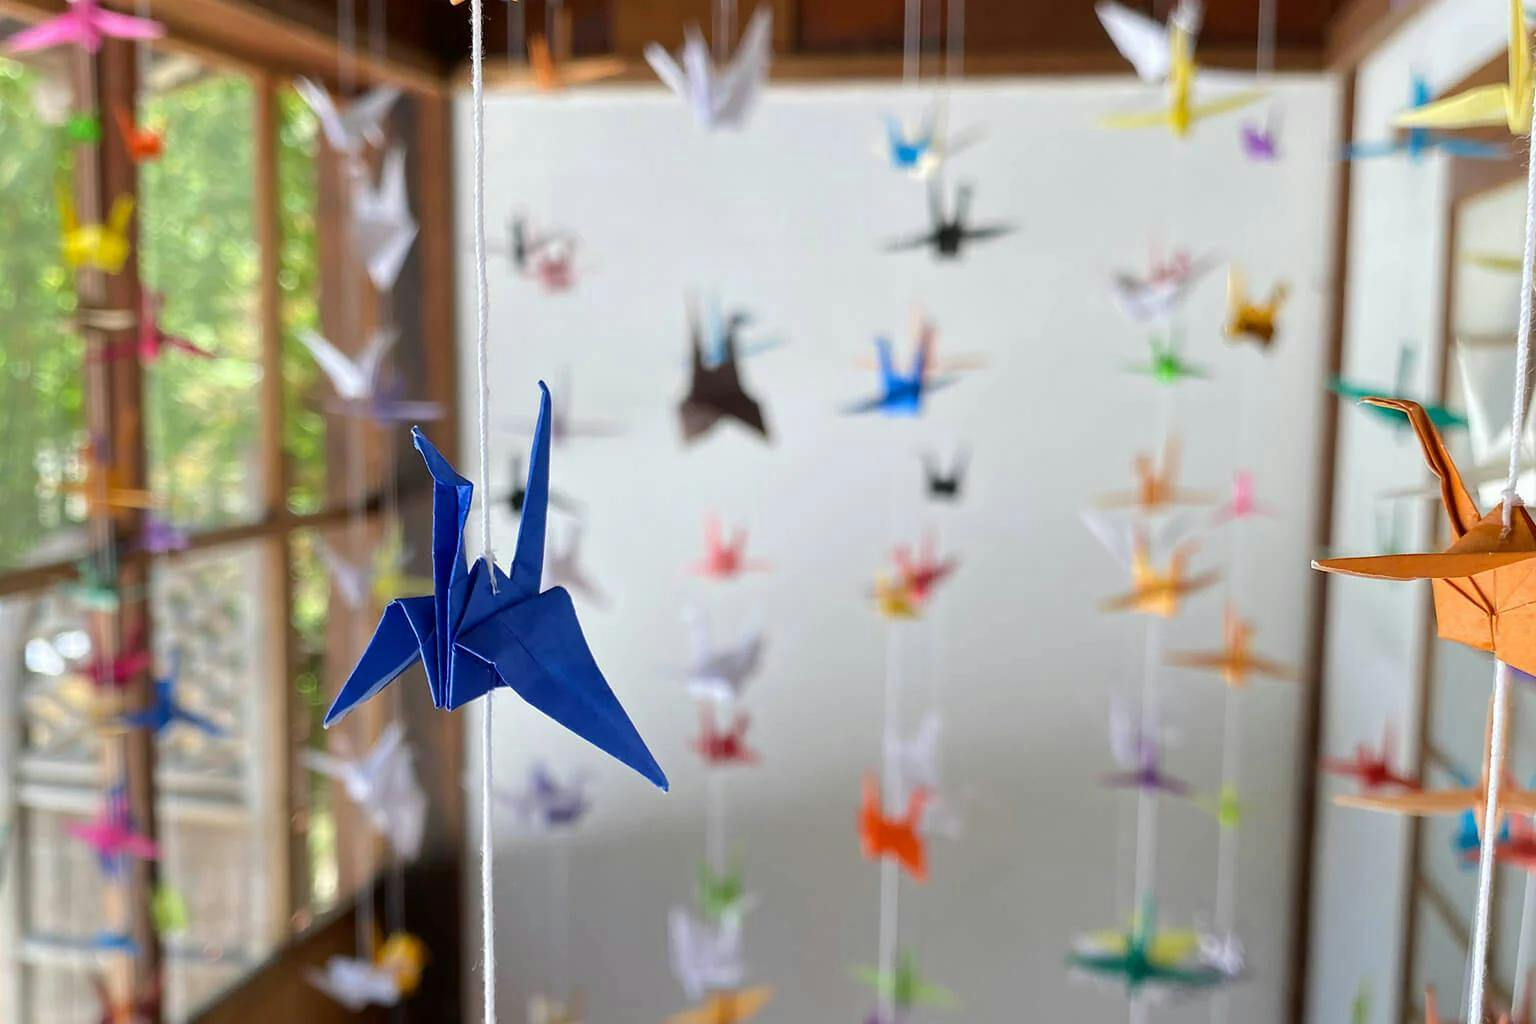 Origami cranes are popular decorations that have become synonymous with Japan.